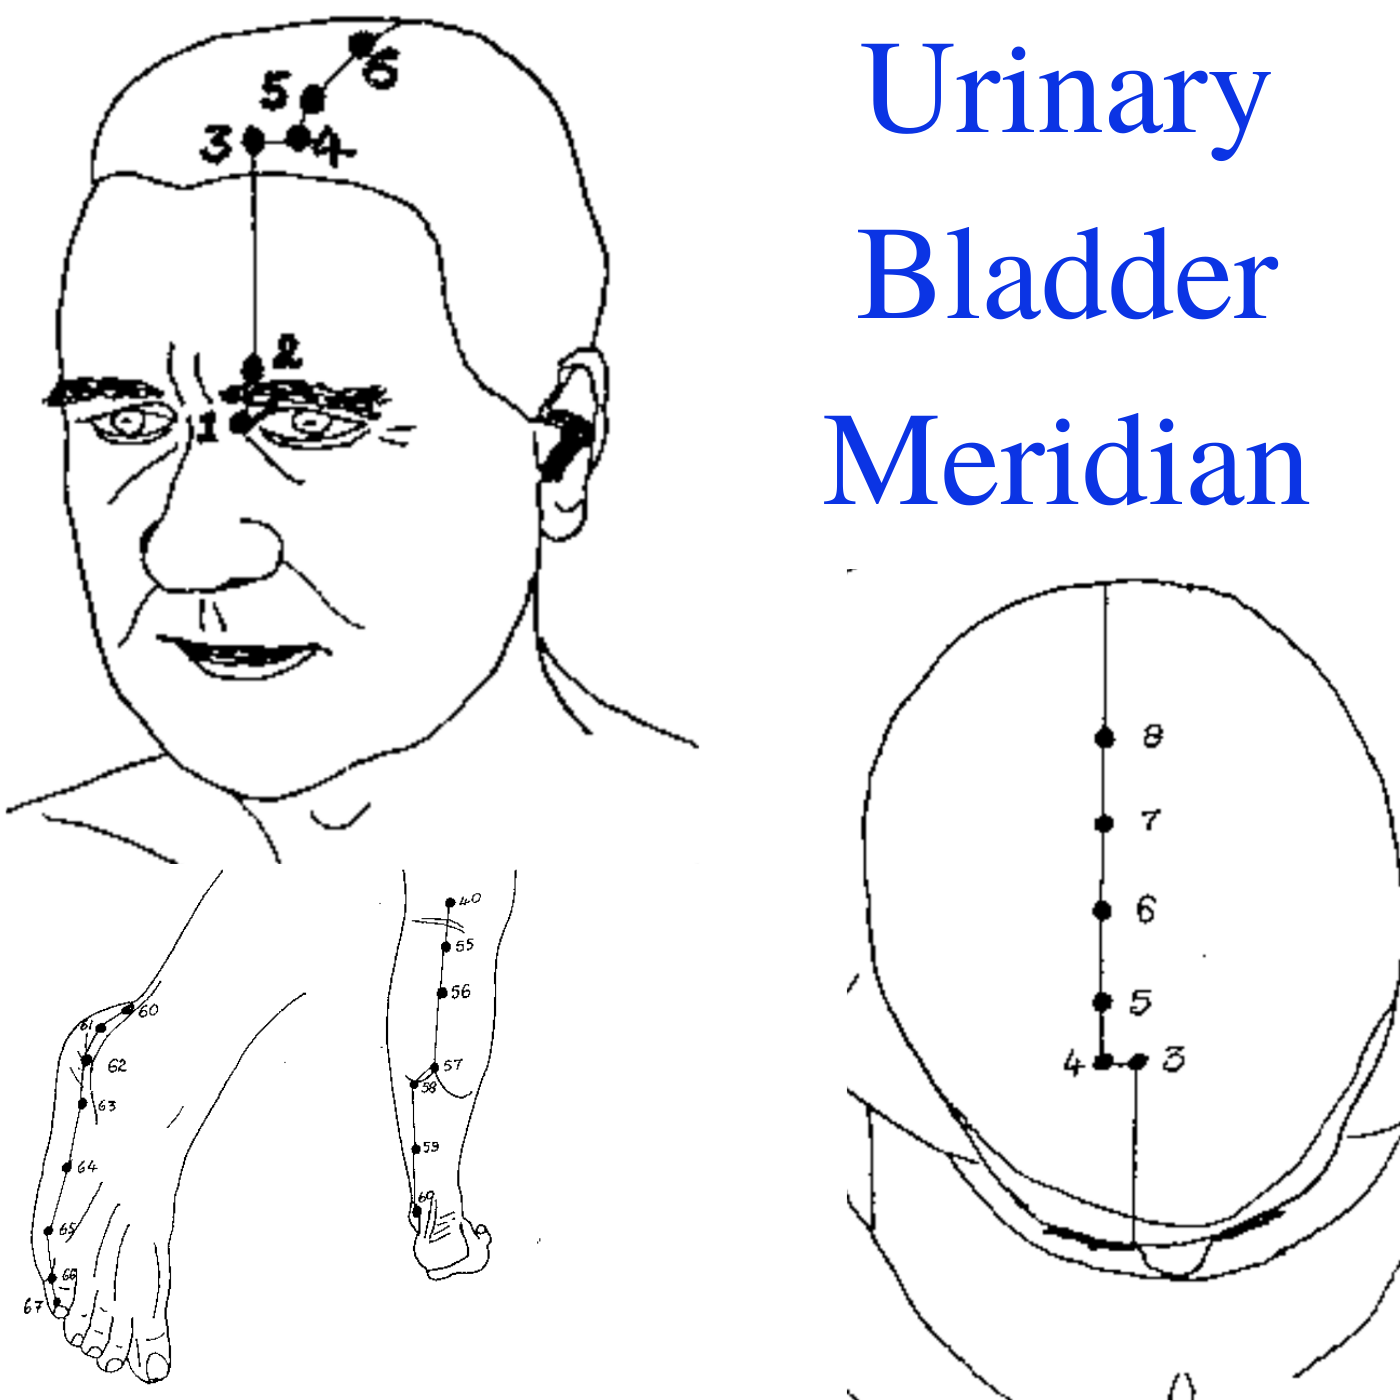 The Urinary Bladder Meridian. Longest Meridian On The Human Body